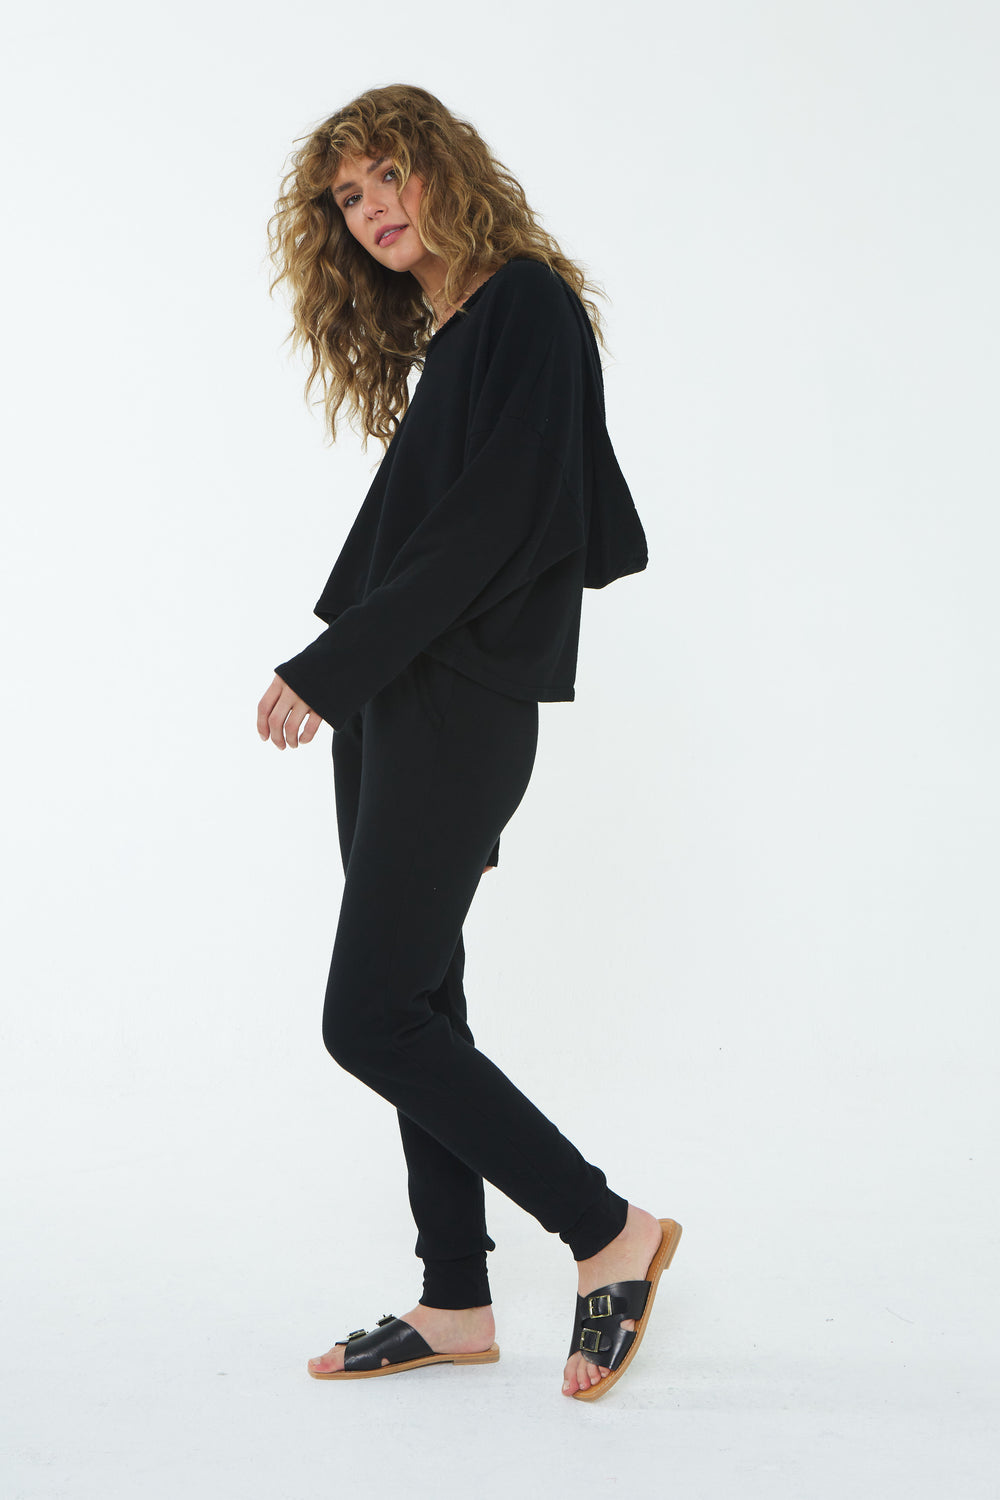 RADLEE SEAMED FRONT HOODIE - Kingfisher Road - Online Boutique